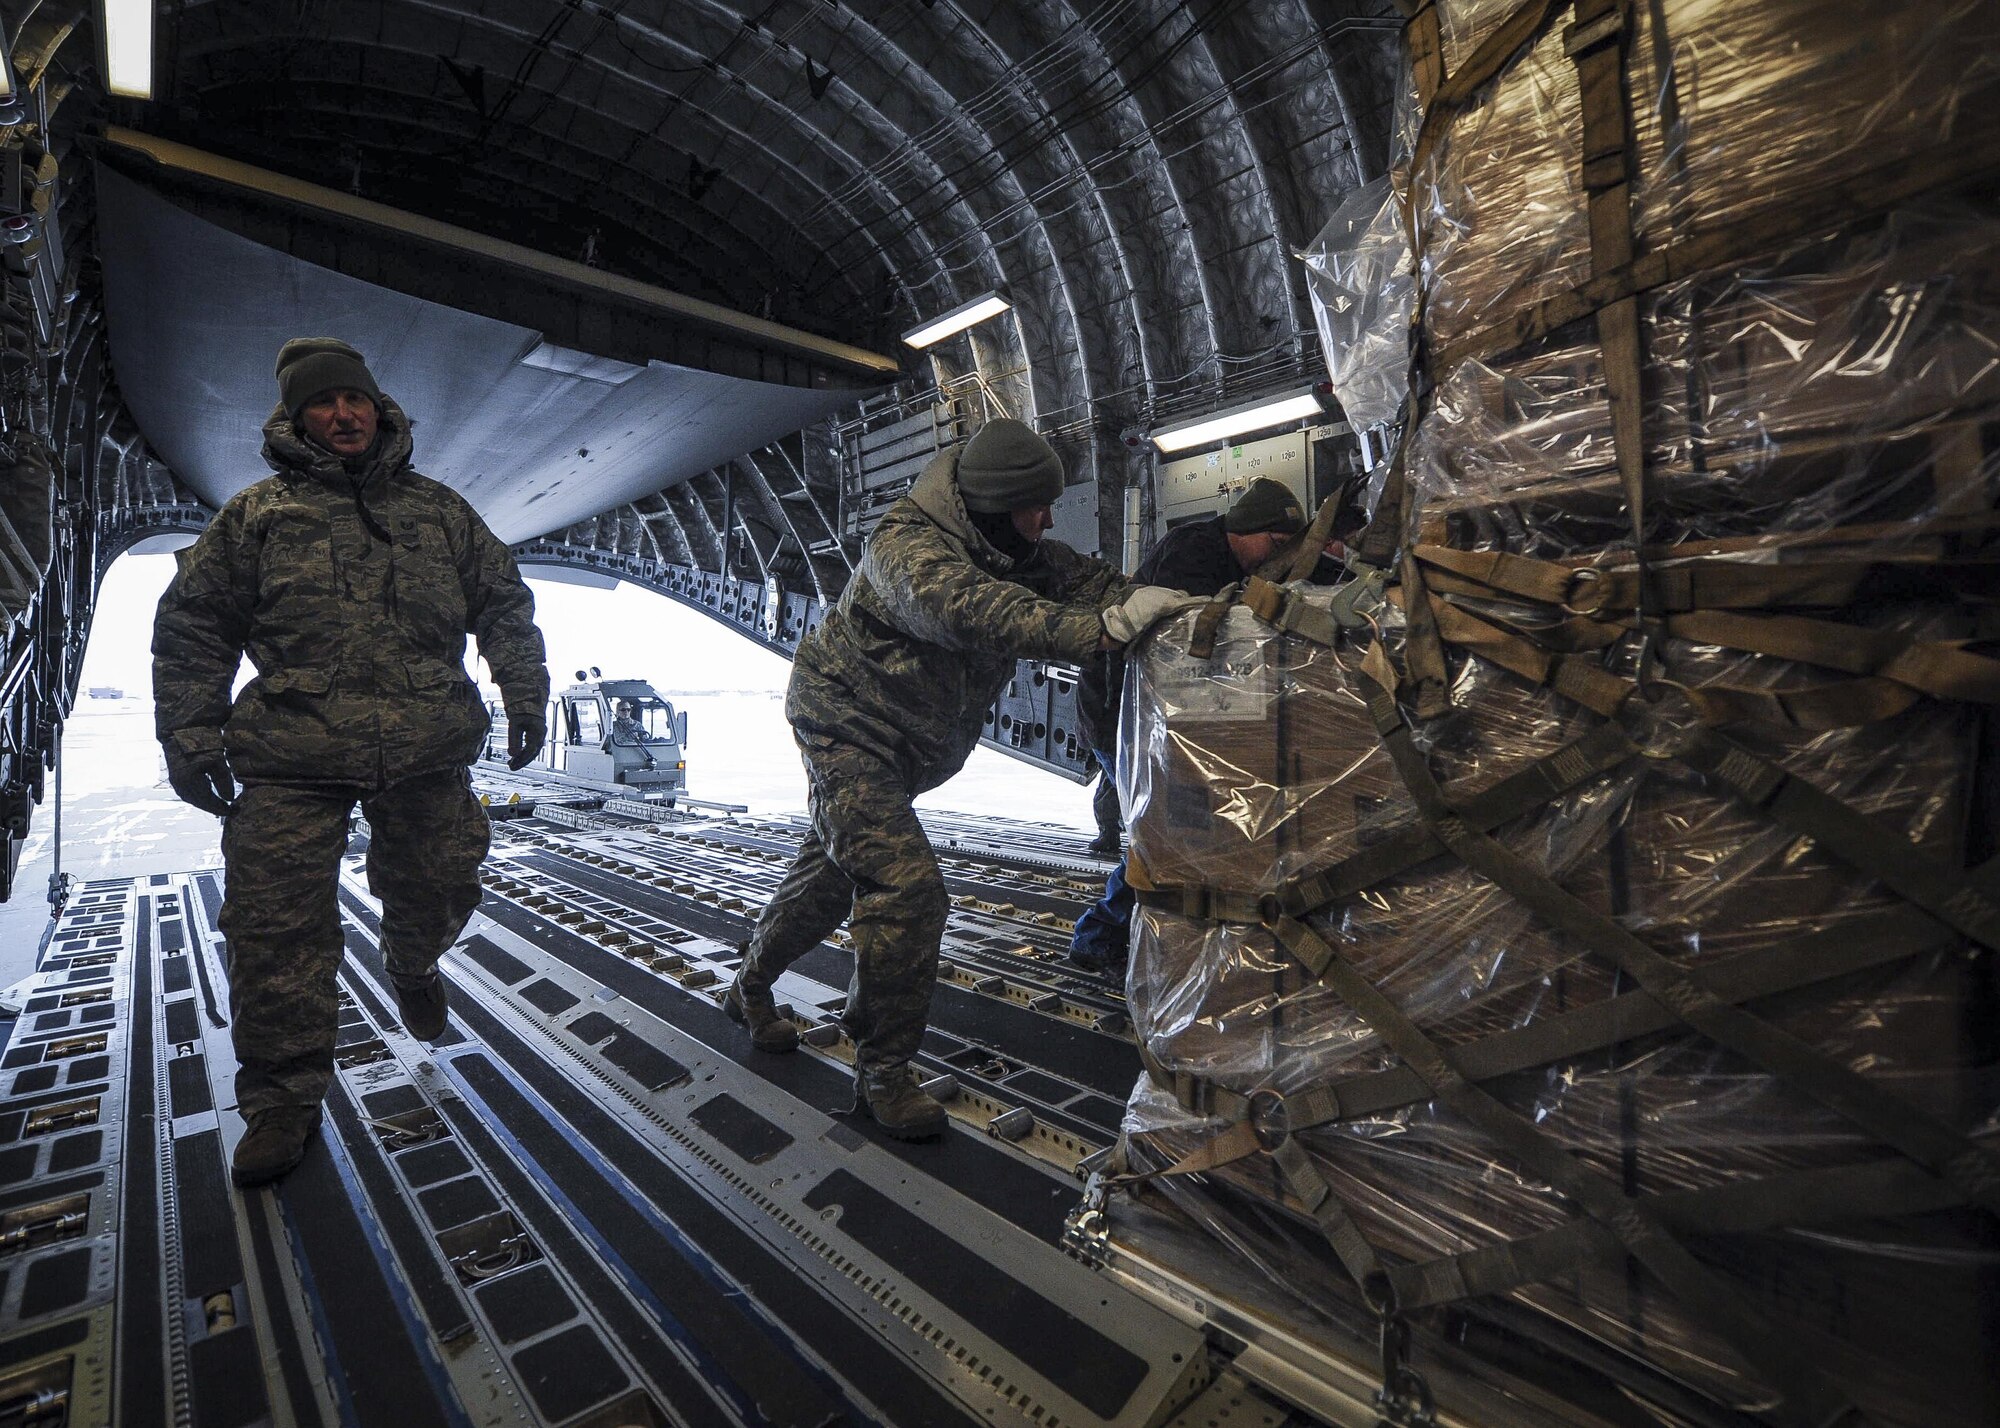 934th Airlift Wing Airmen at Minneapolis-St. Paul Air Reserve Station load humanitarian cargo onto a Joint Base Charleston C-17 Globemaster III Jan. 13, 2017. The 315th Airlift Wing flew more than 50,000 pounds of donated meals intended for refugees in northern Iraq. (U.S. Air Force photo by Senior Airman Tom Brading)